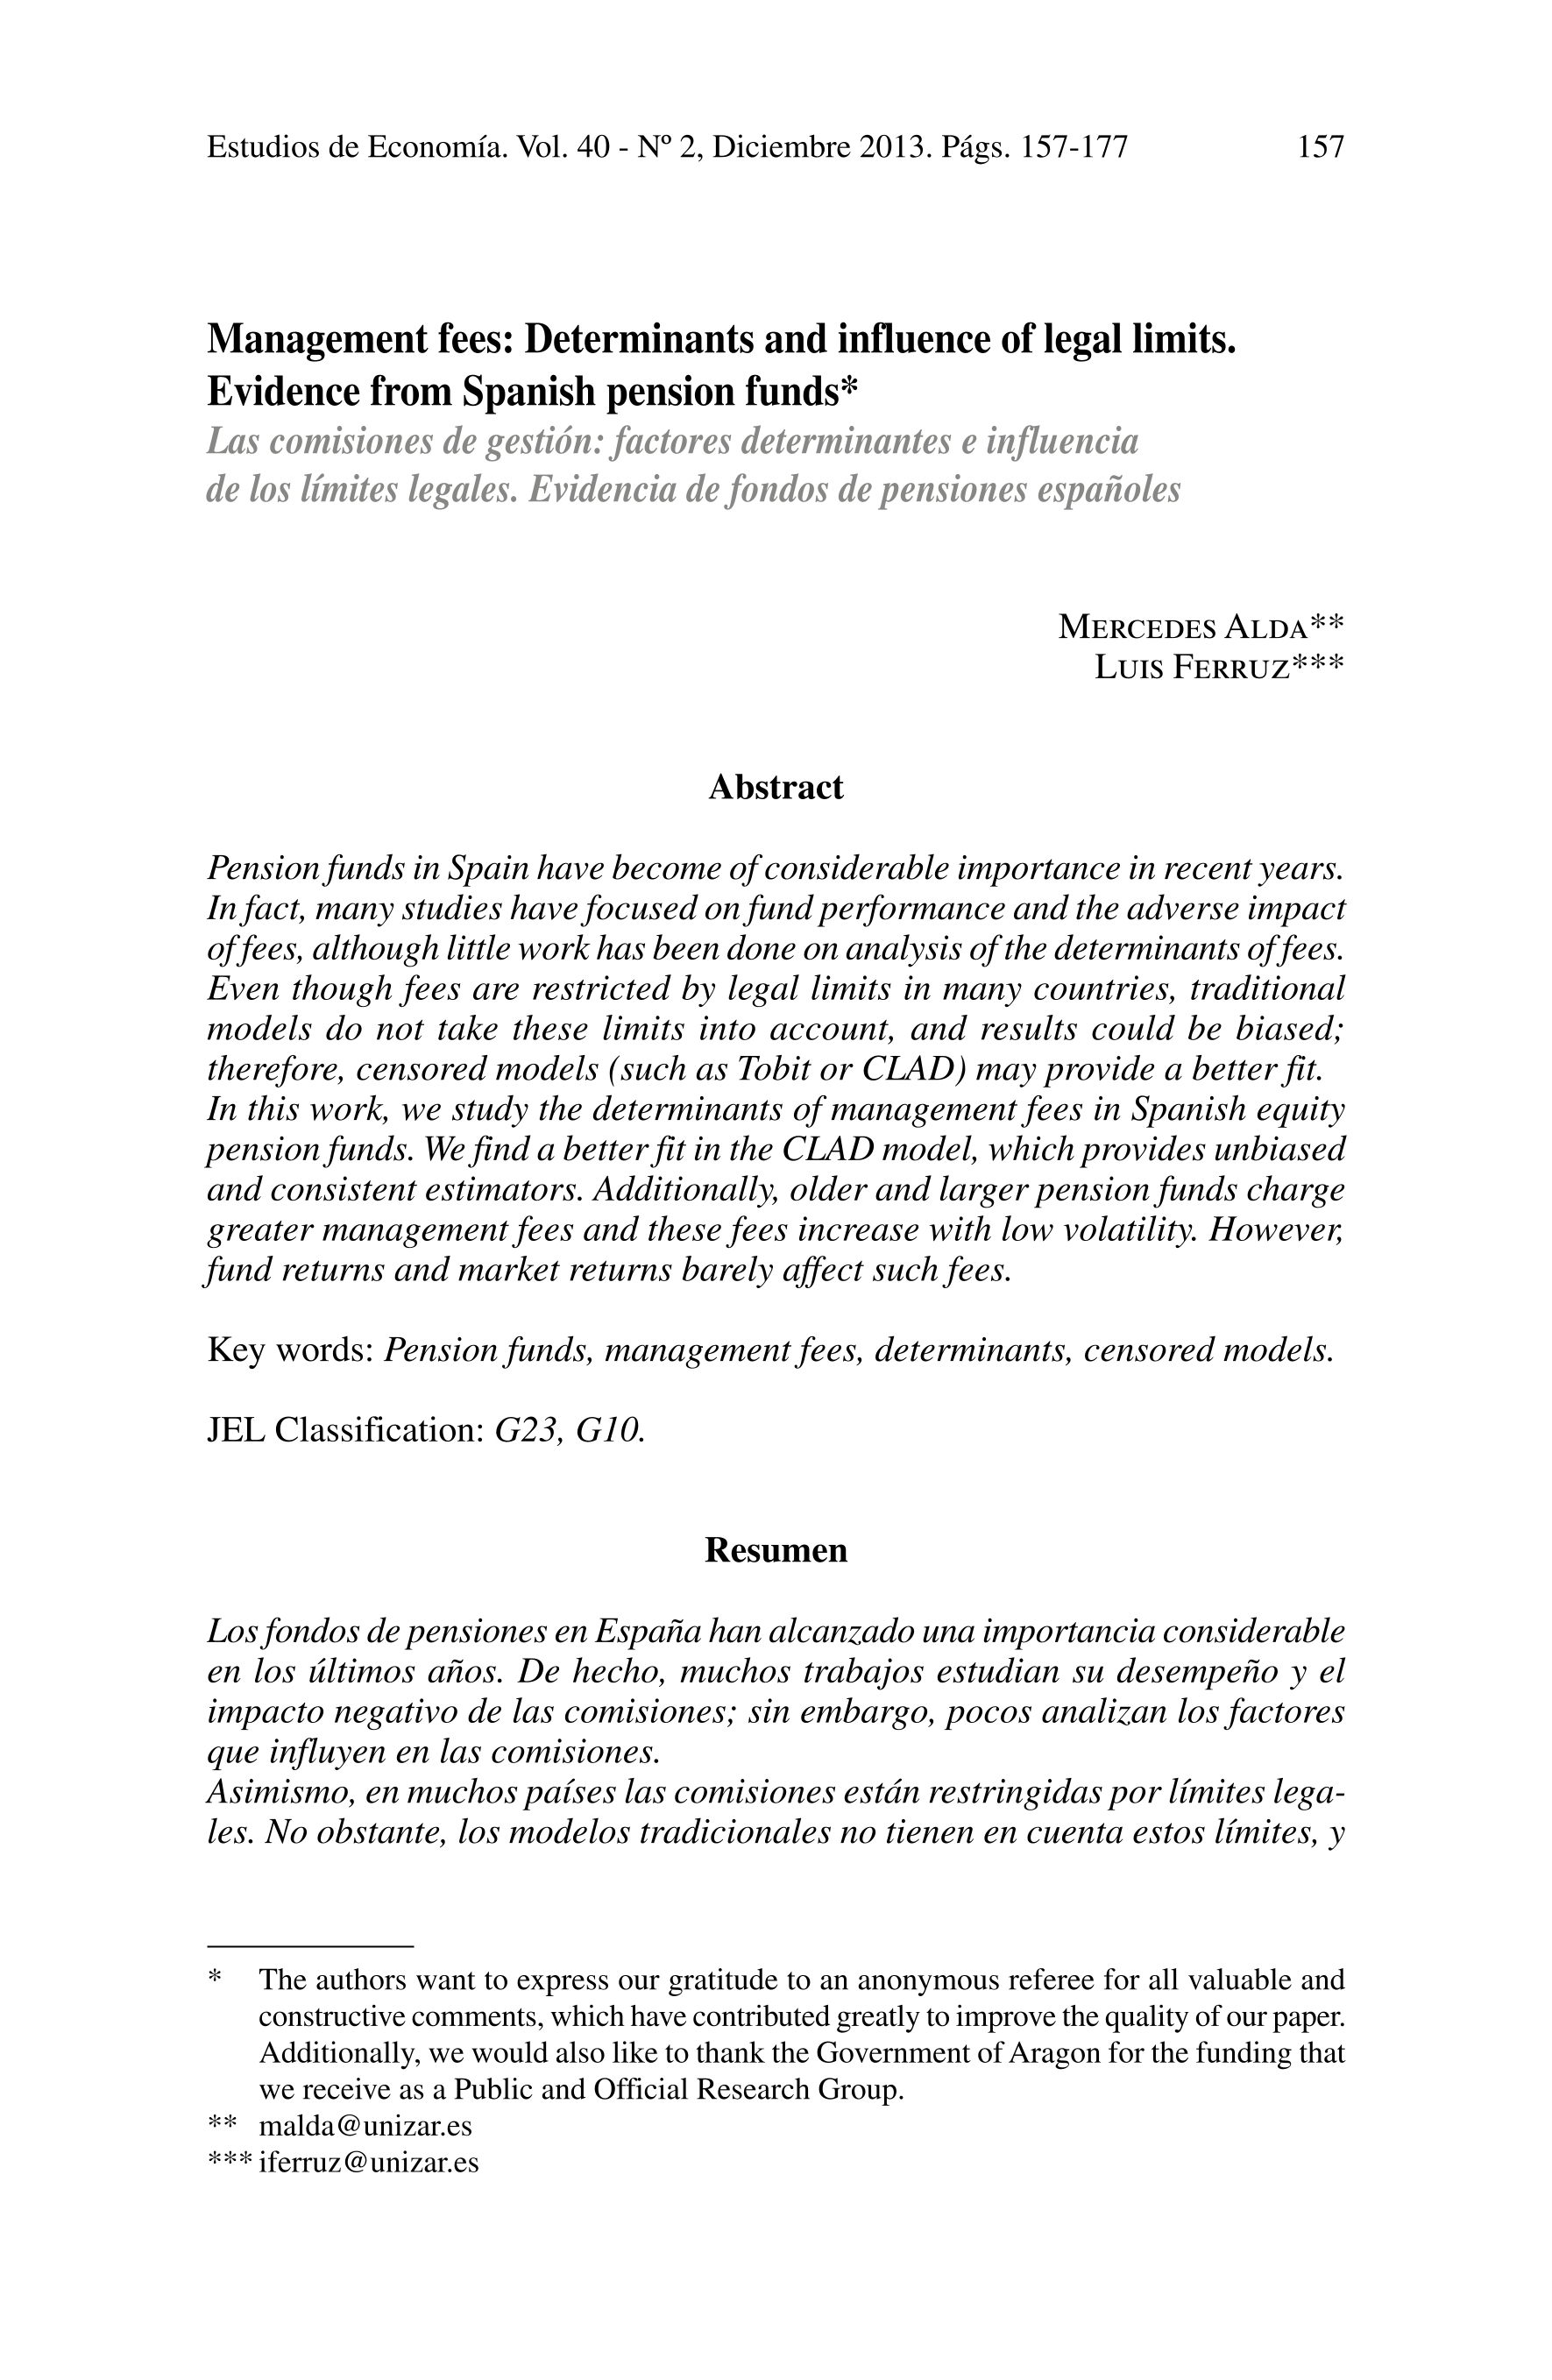 Management fees: determinants and influence of legal limits. Evidence from Spanish pension funds